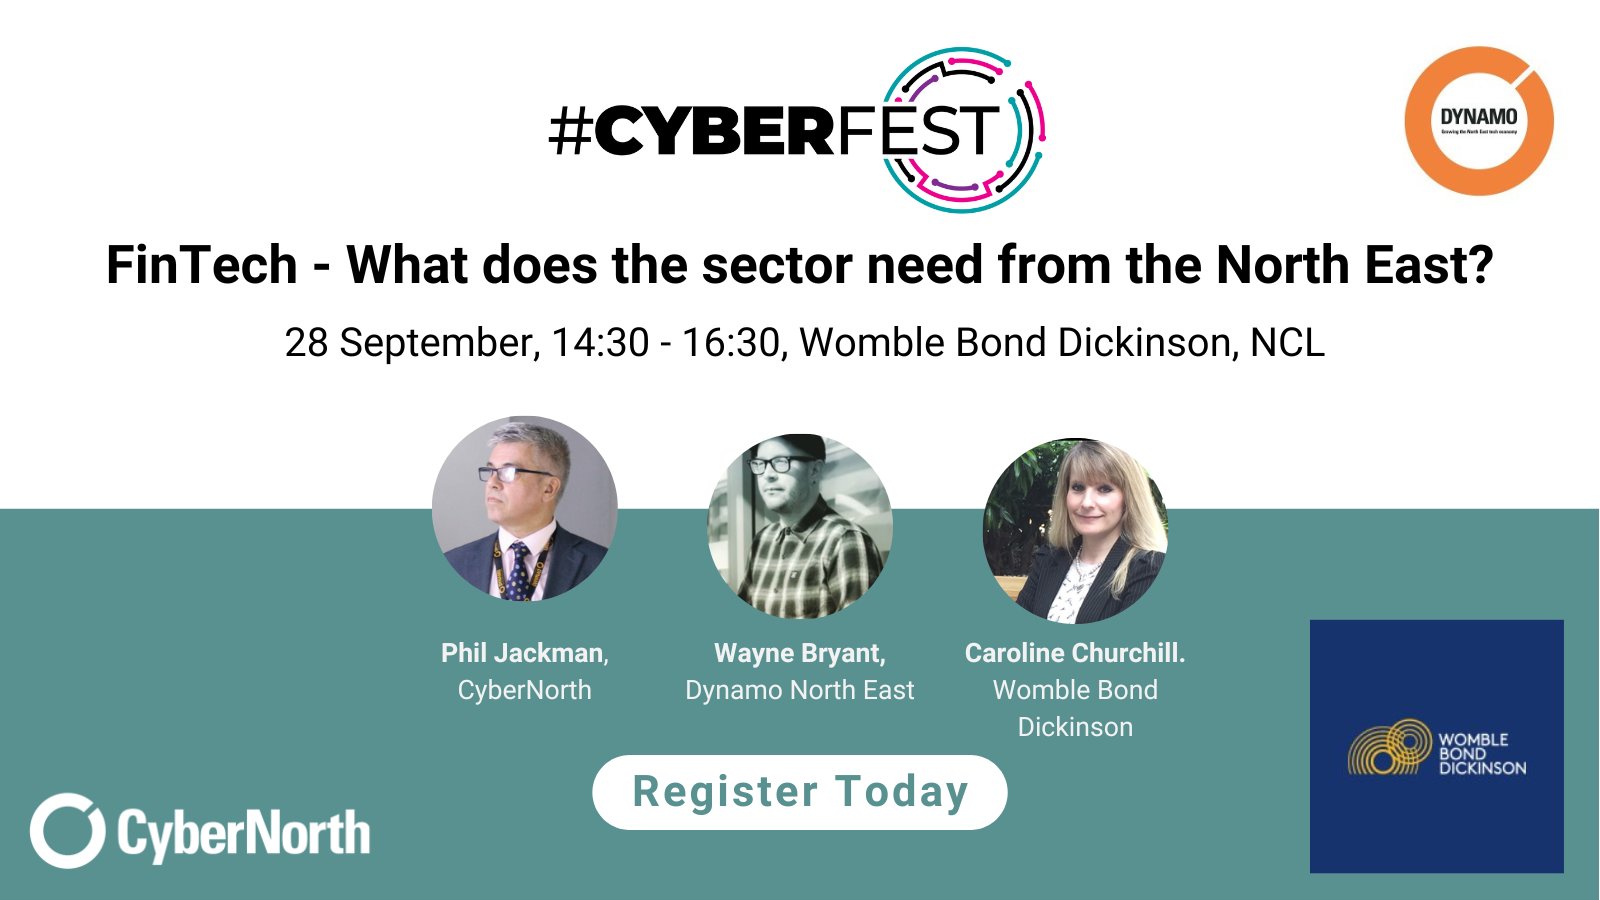 CyberFest22 - FinTech - What does the sector need from the North East?